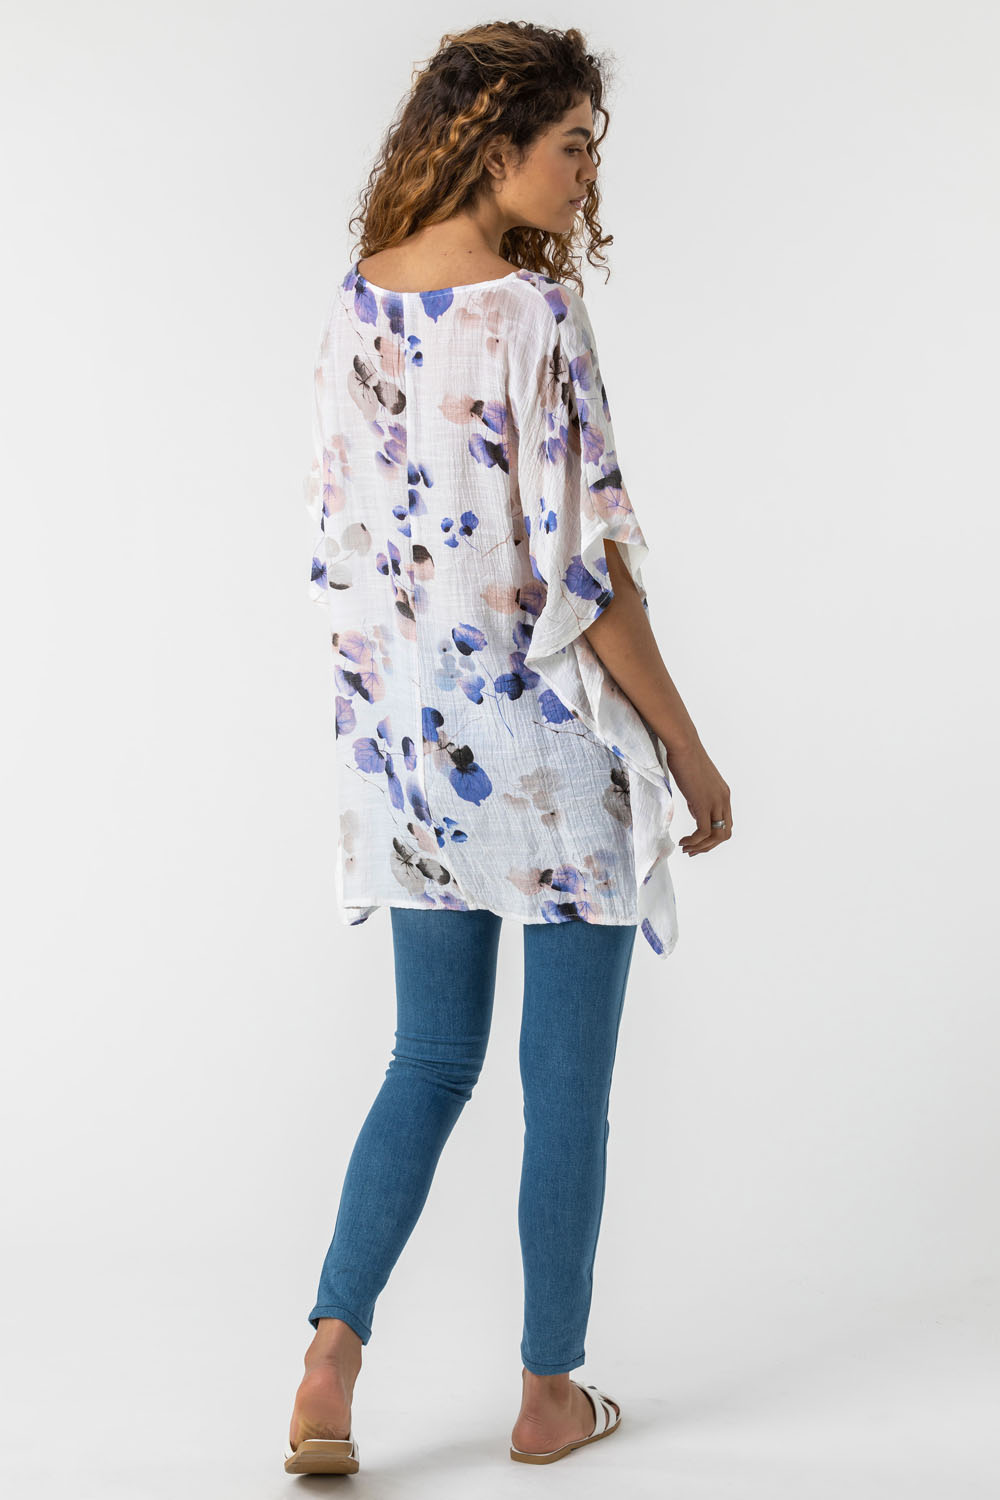 Blue Abstract Floral Print Tunic Top, Image 2 of 5